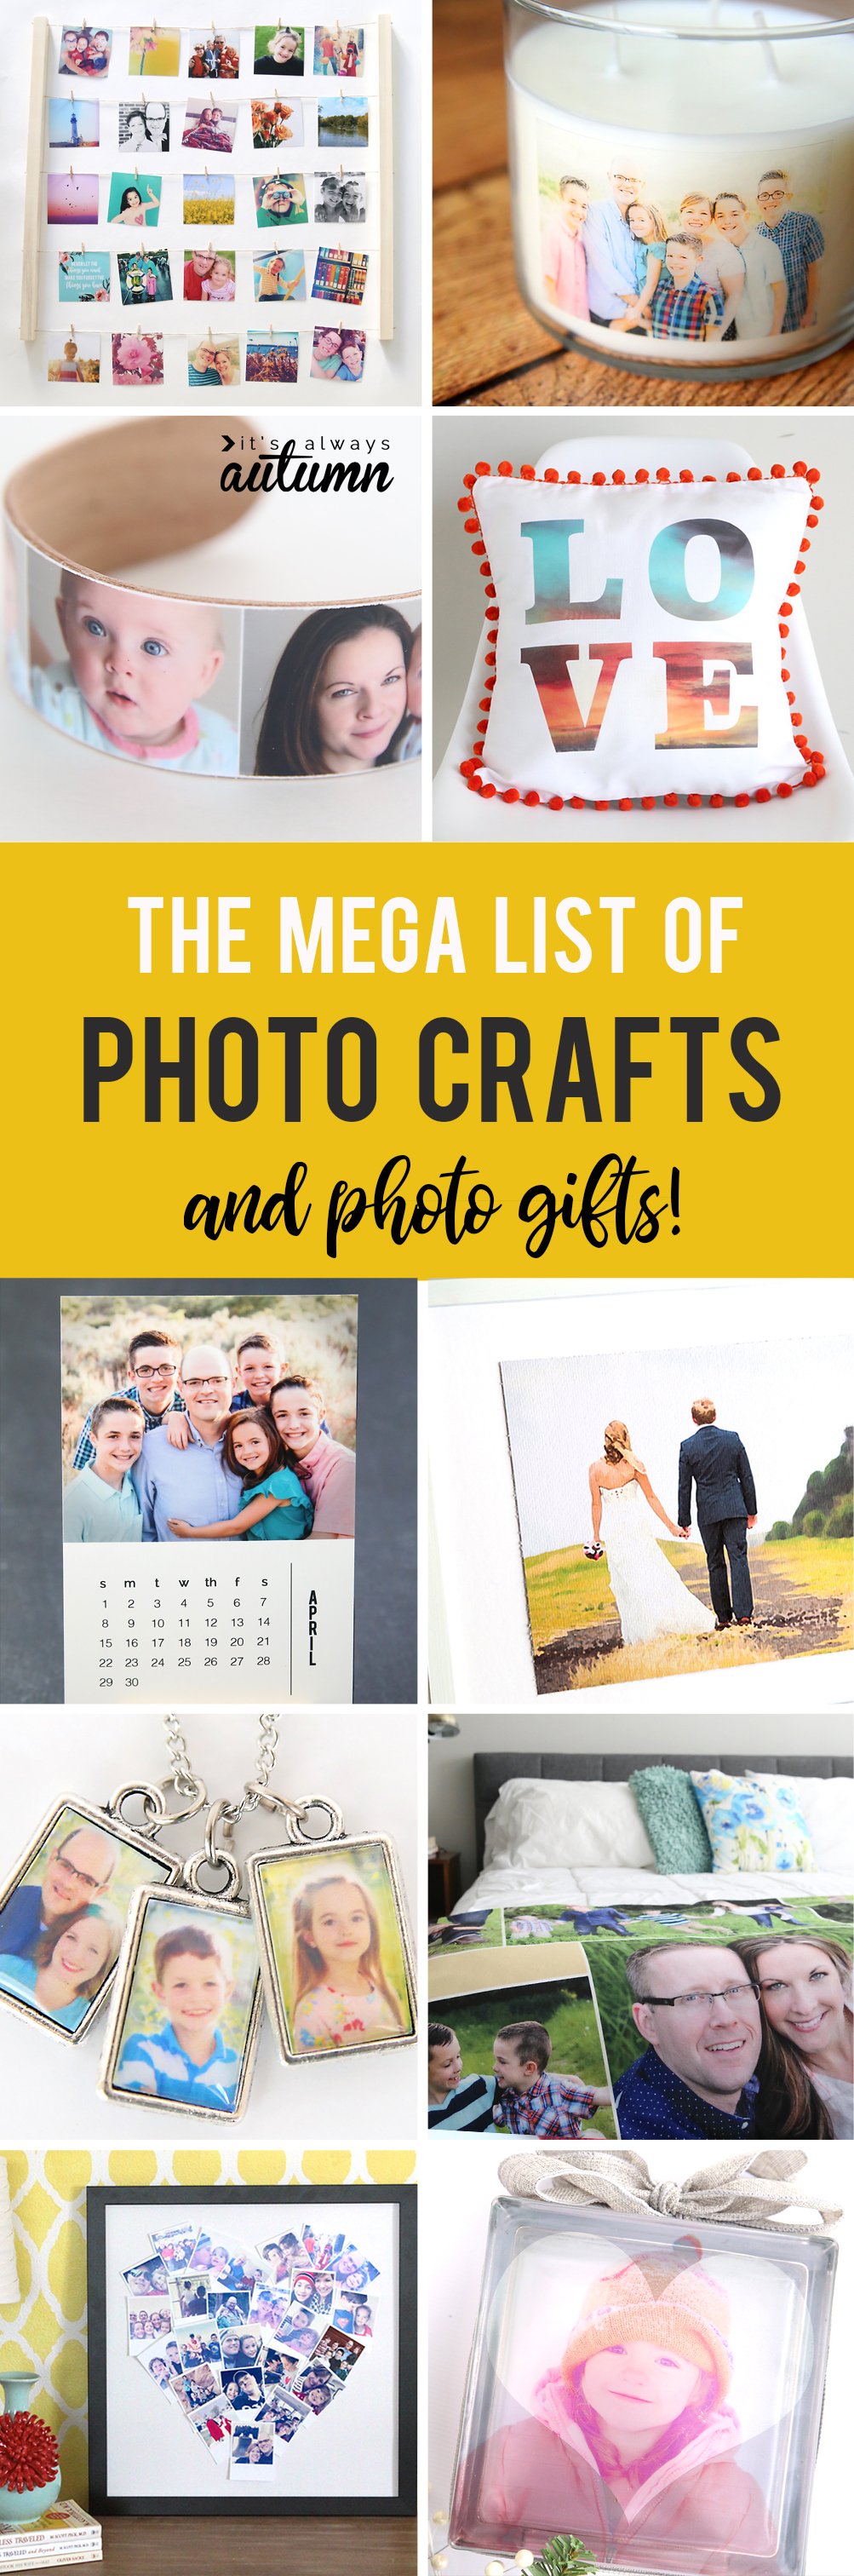 Collage of photo crafts and photo gifts